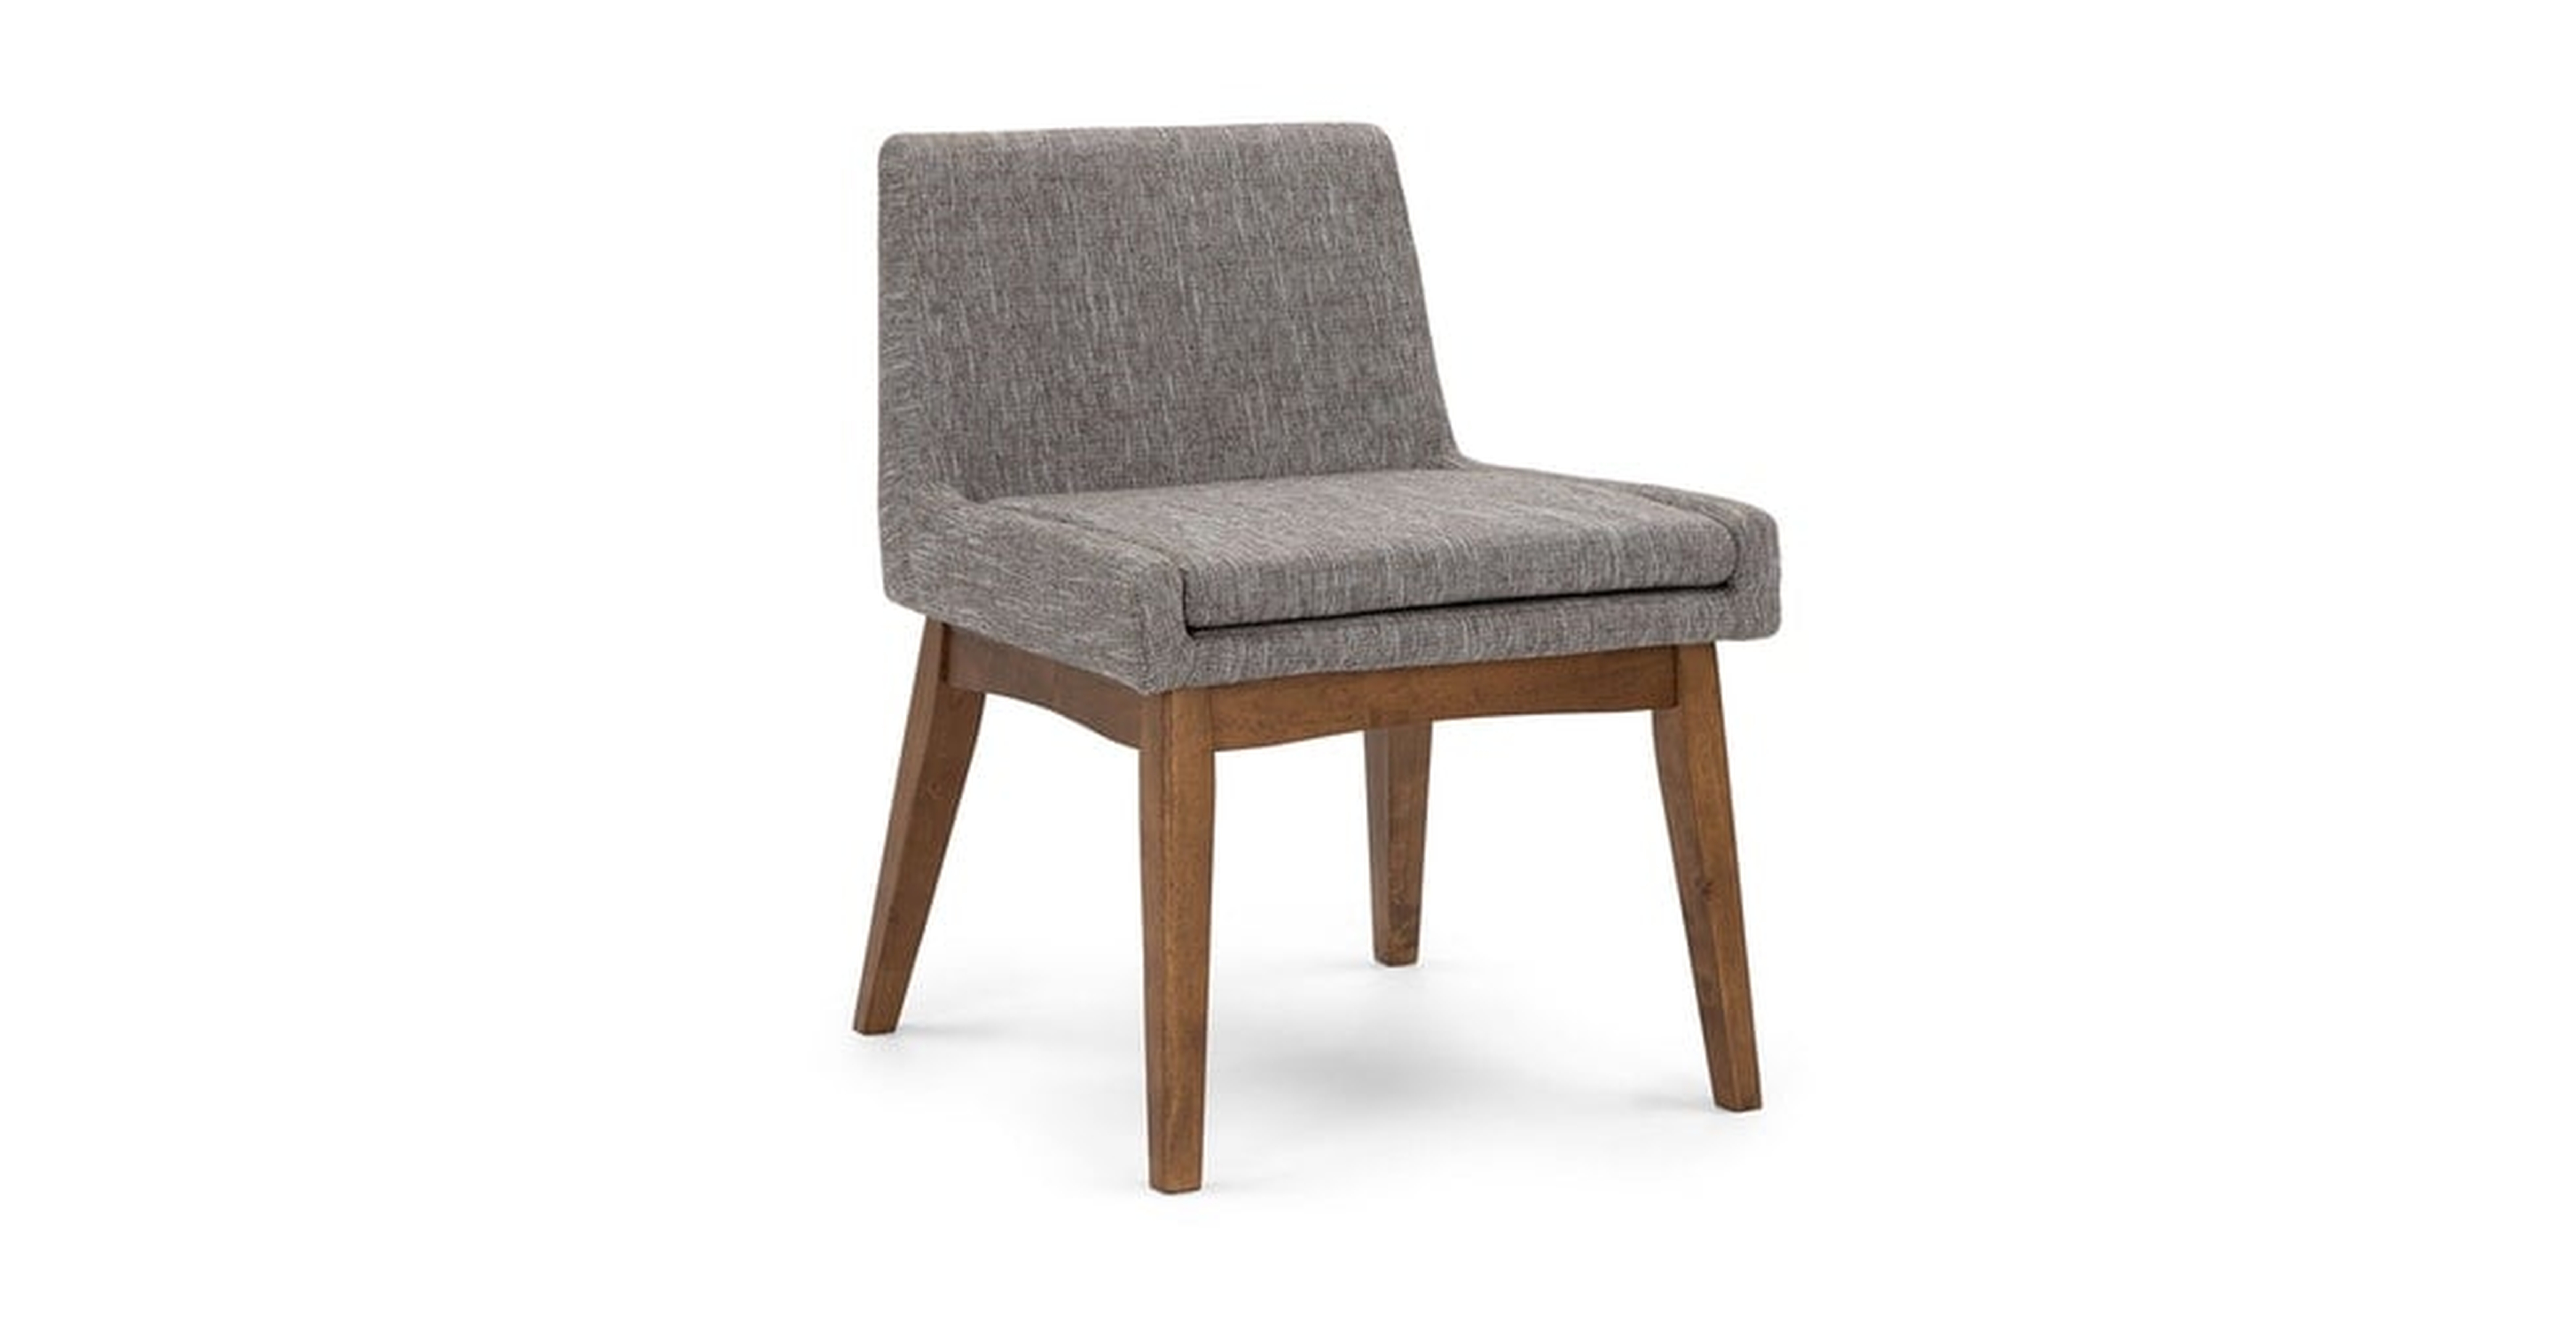 Chantel Volcanic Gray Dining Chair - Article